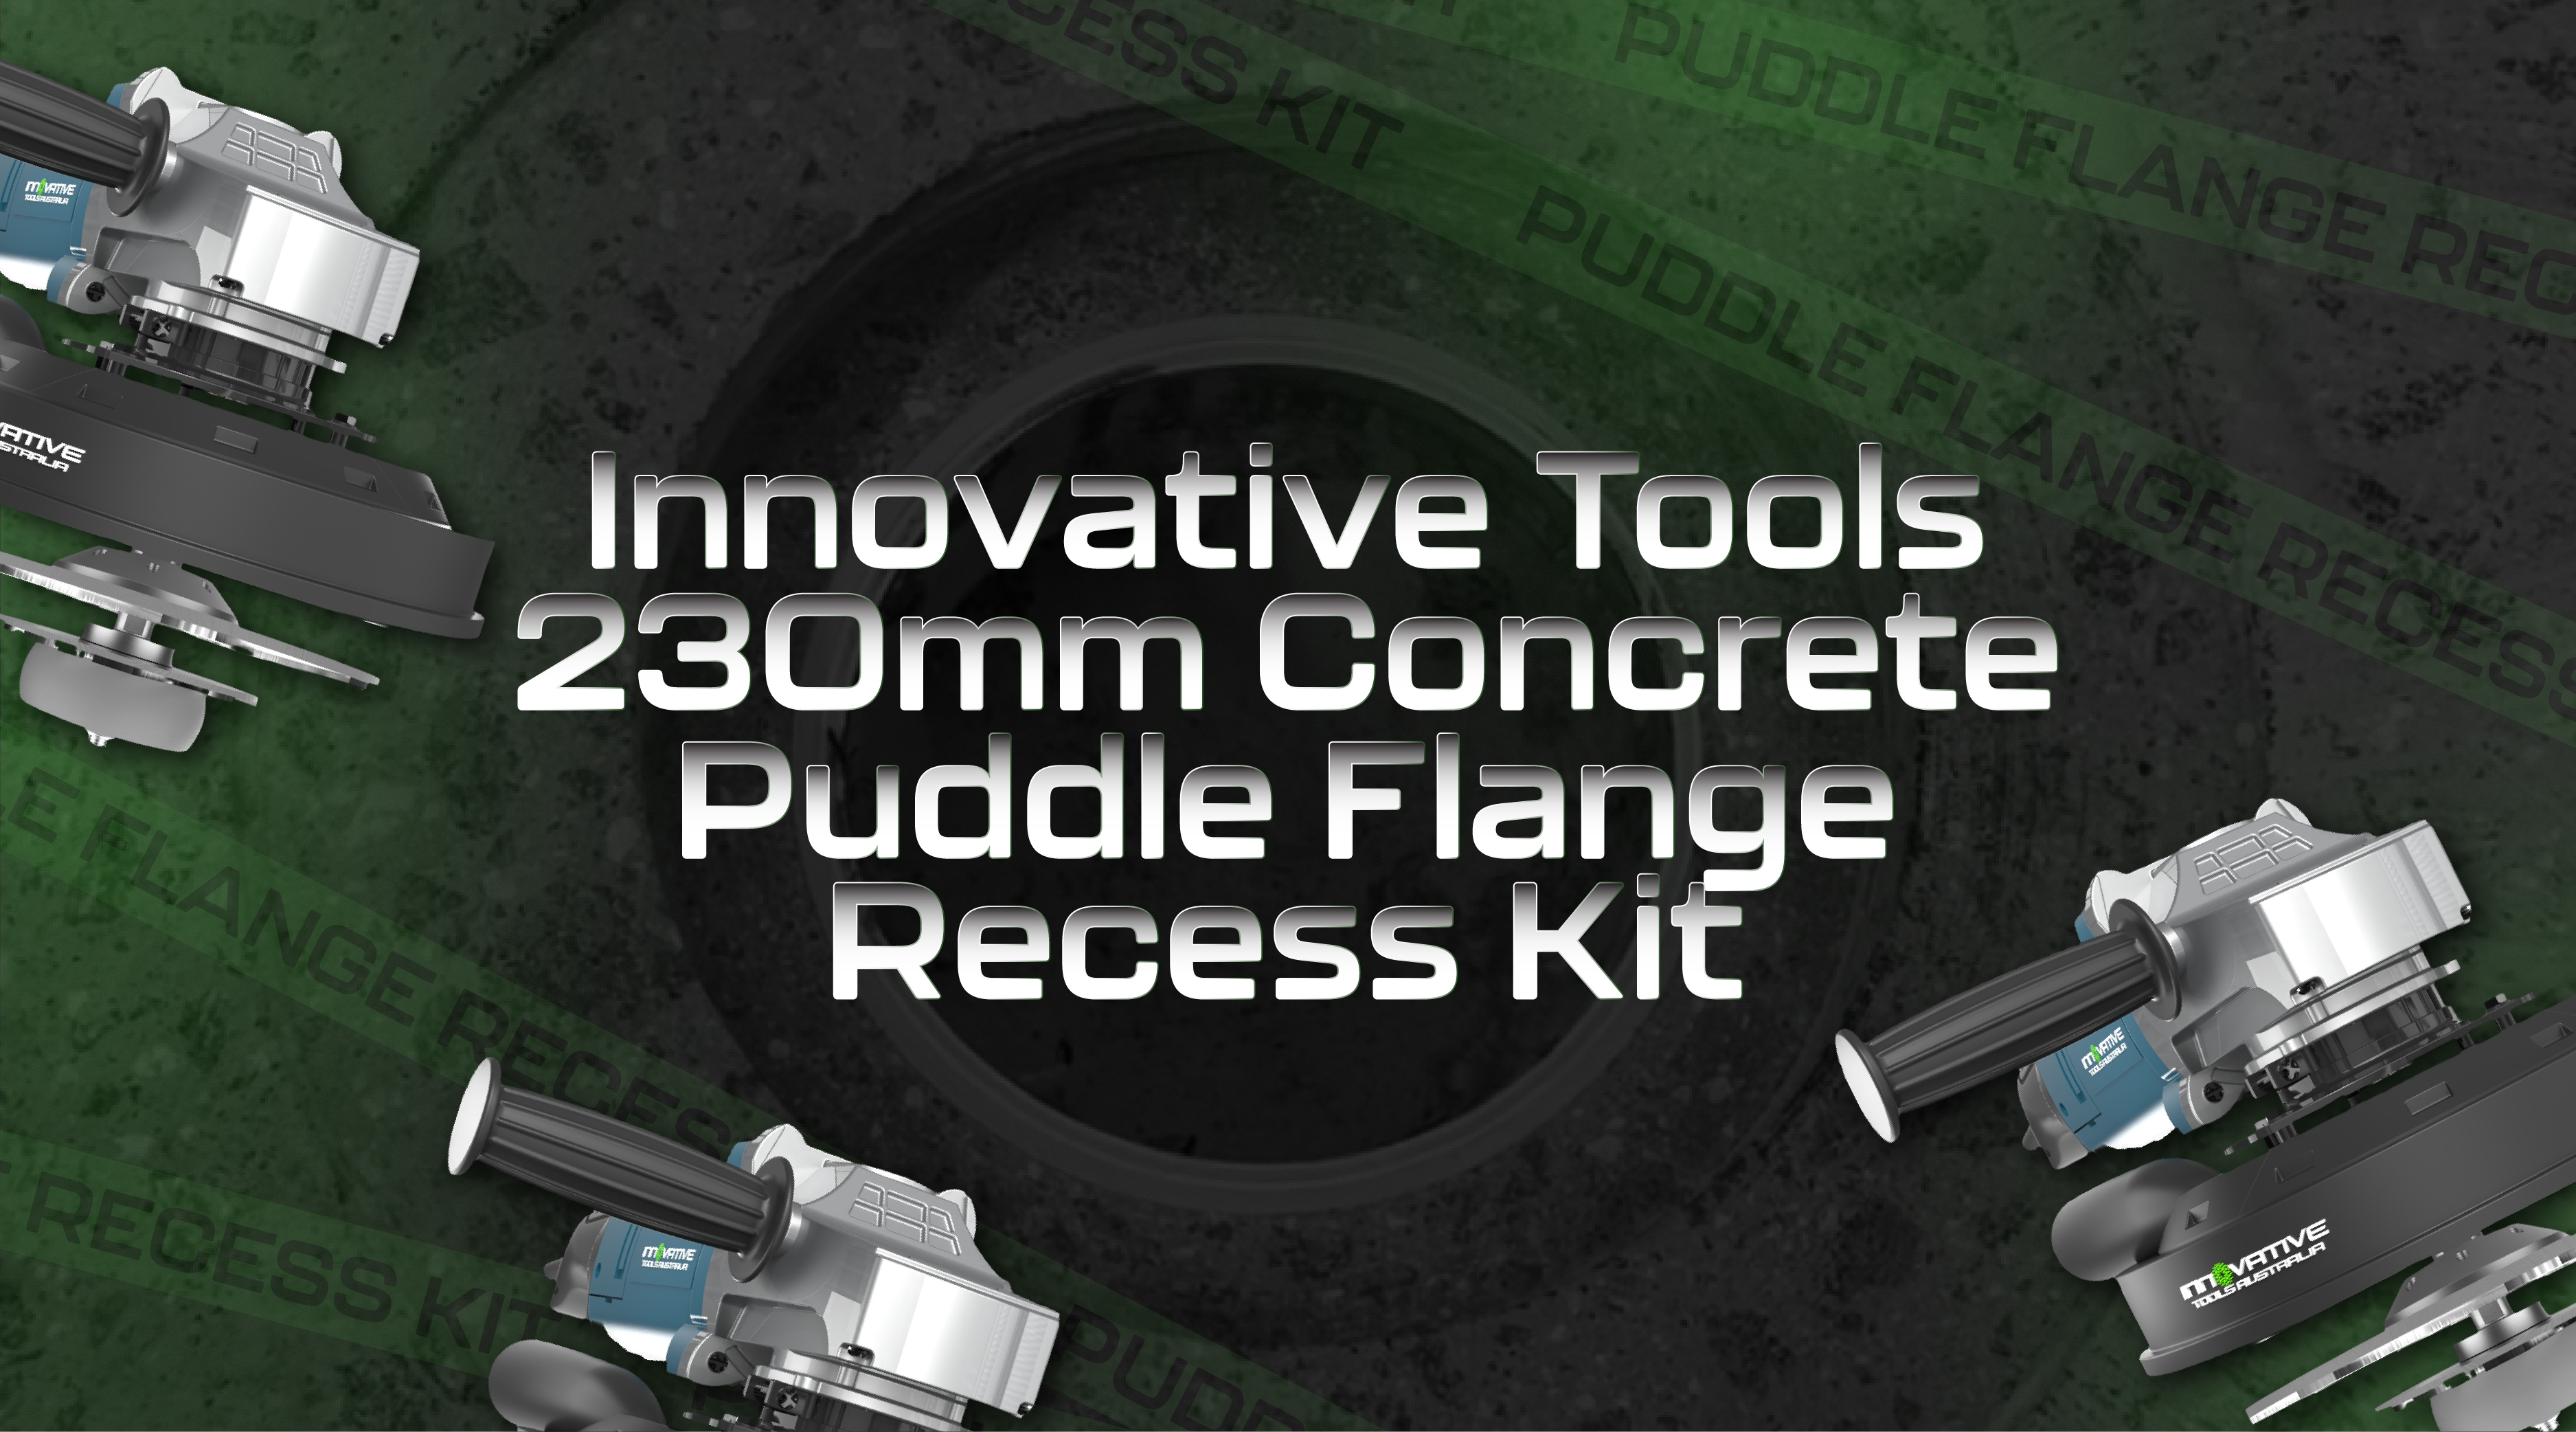 Introducing the Innovative Tools 230mm Concrete Puddle Flange Recess Kit